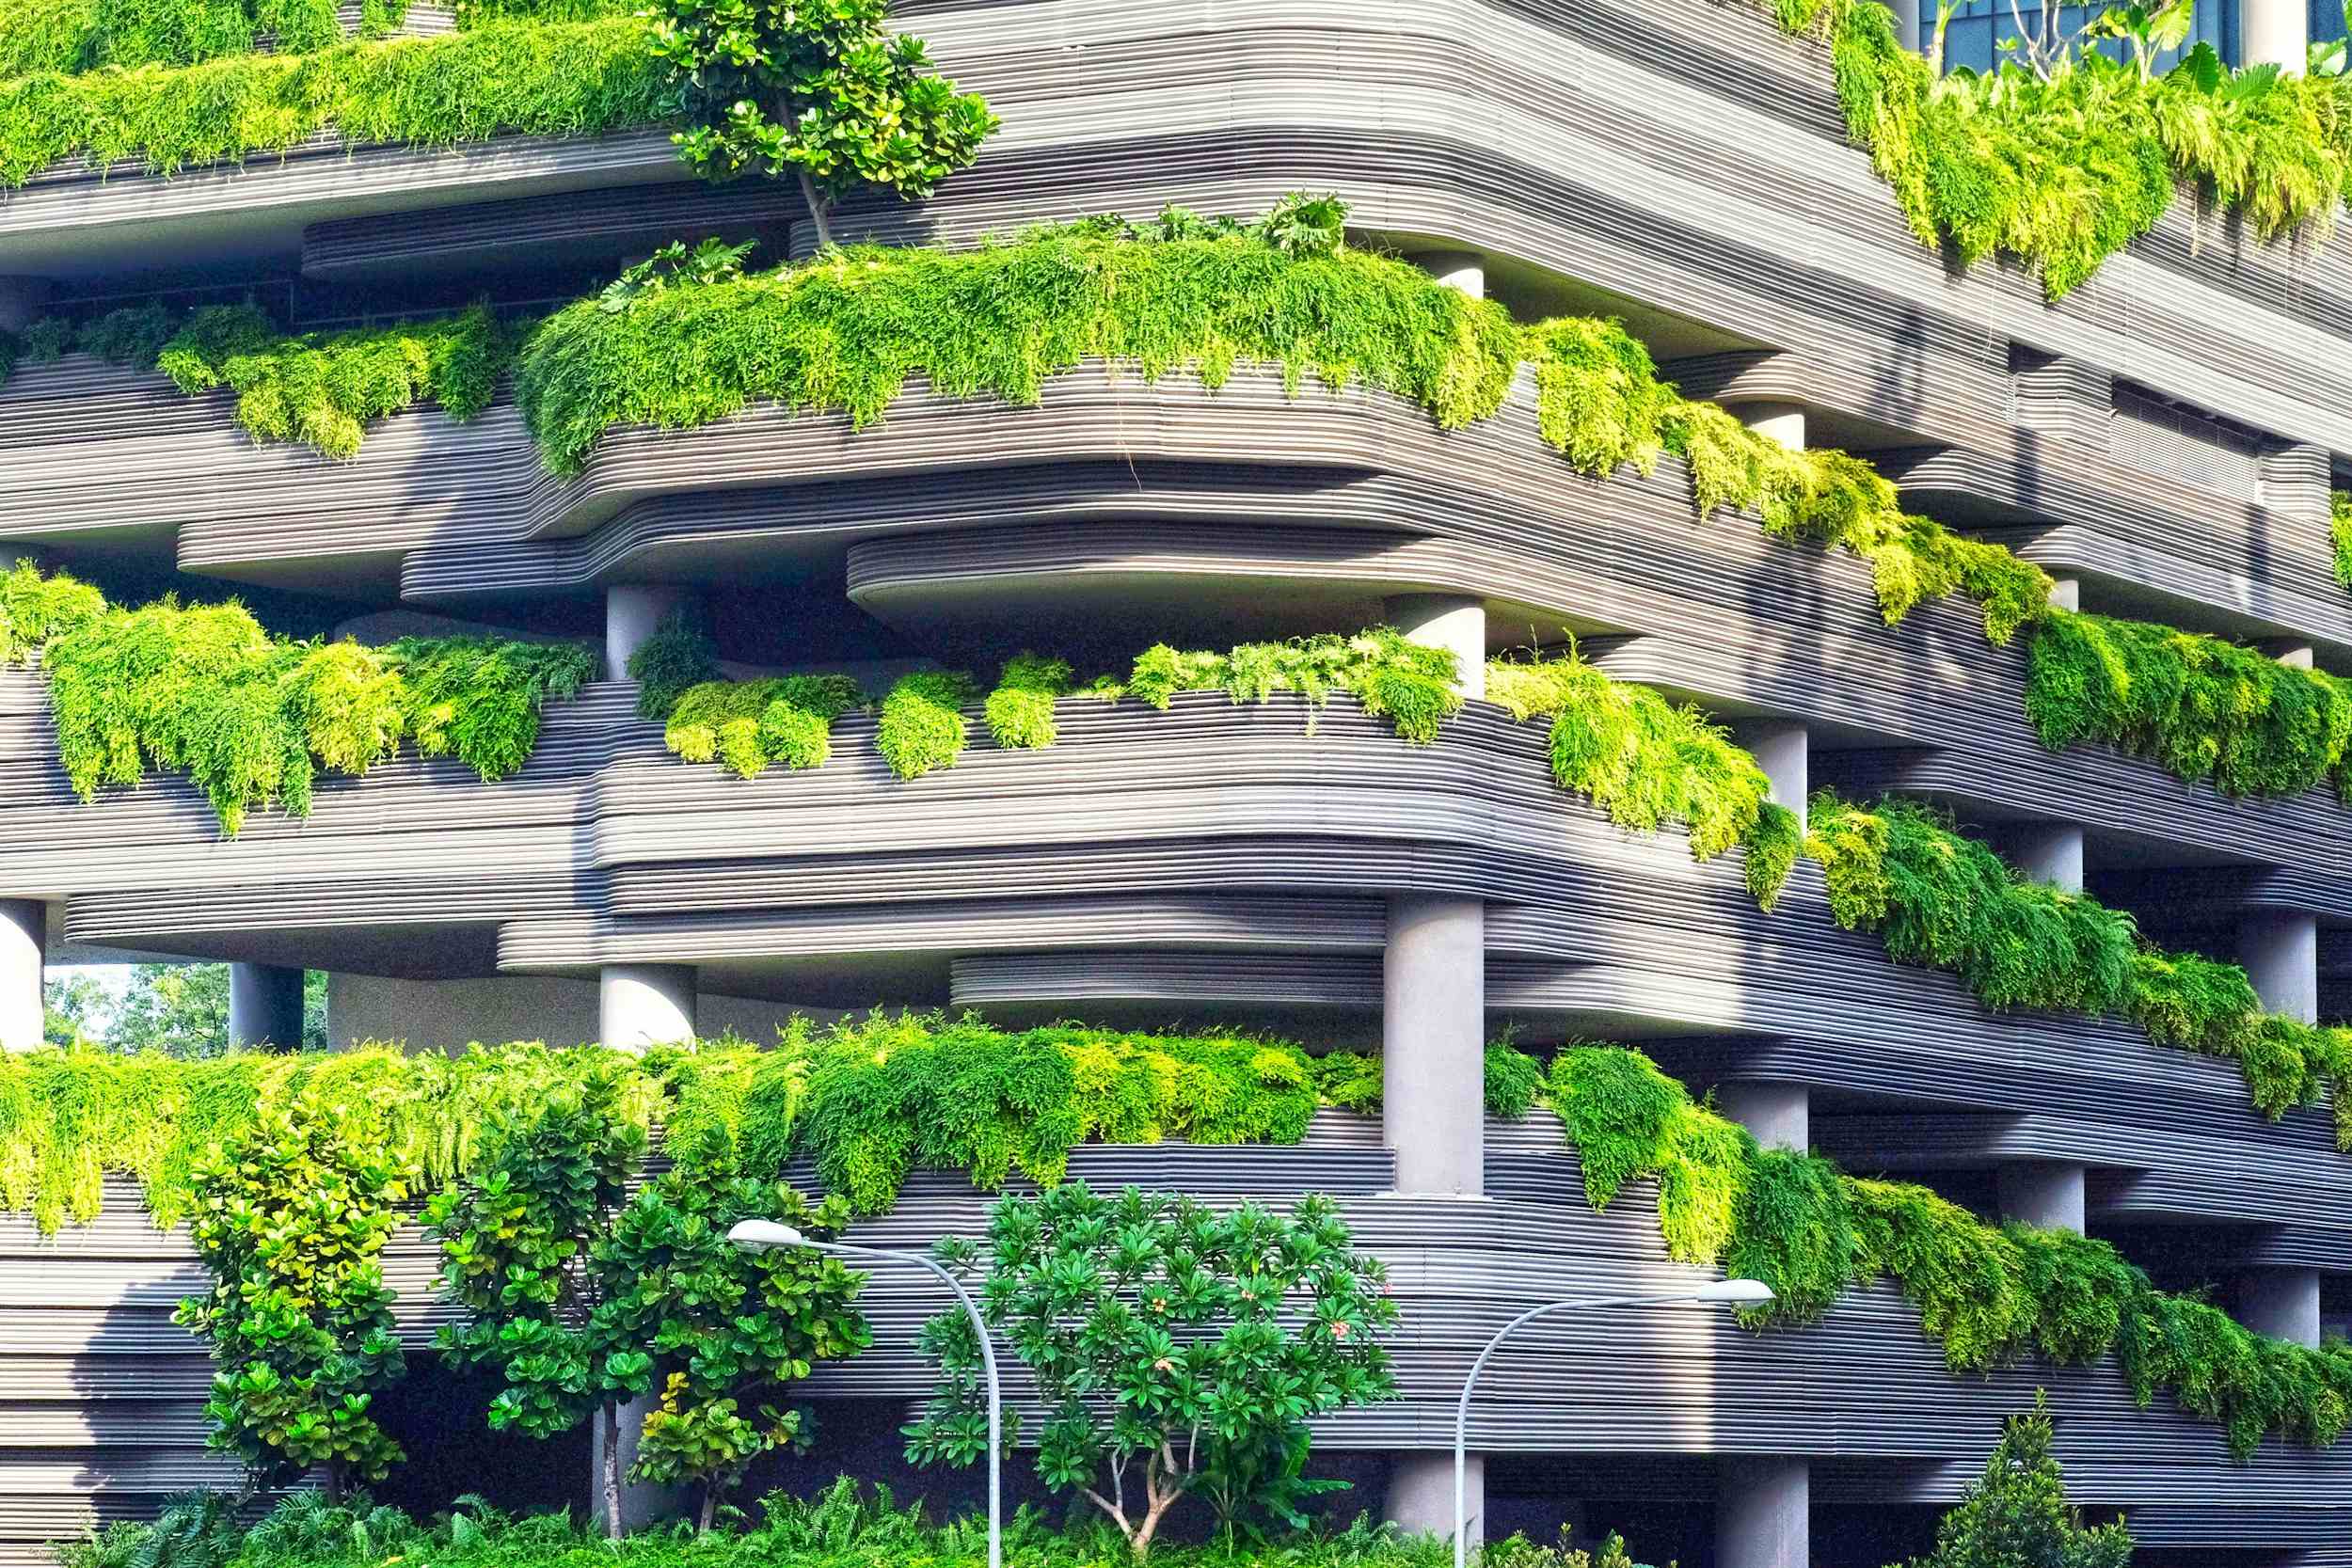 Concrete building covered in plants